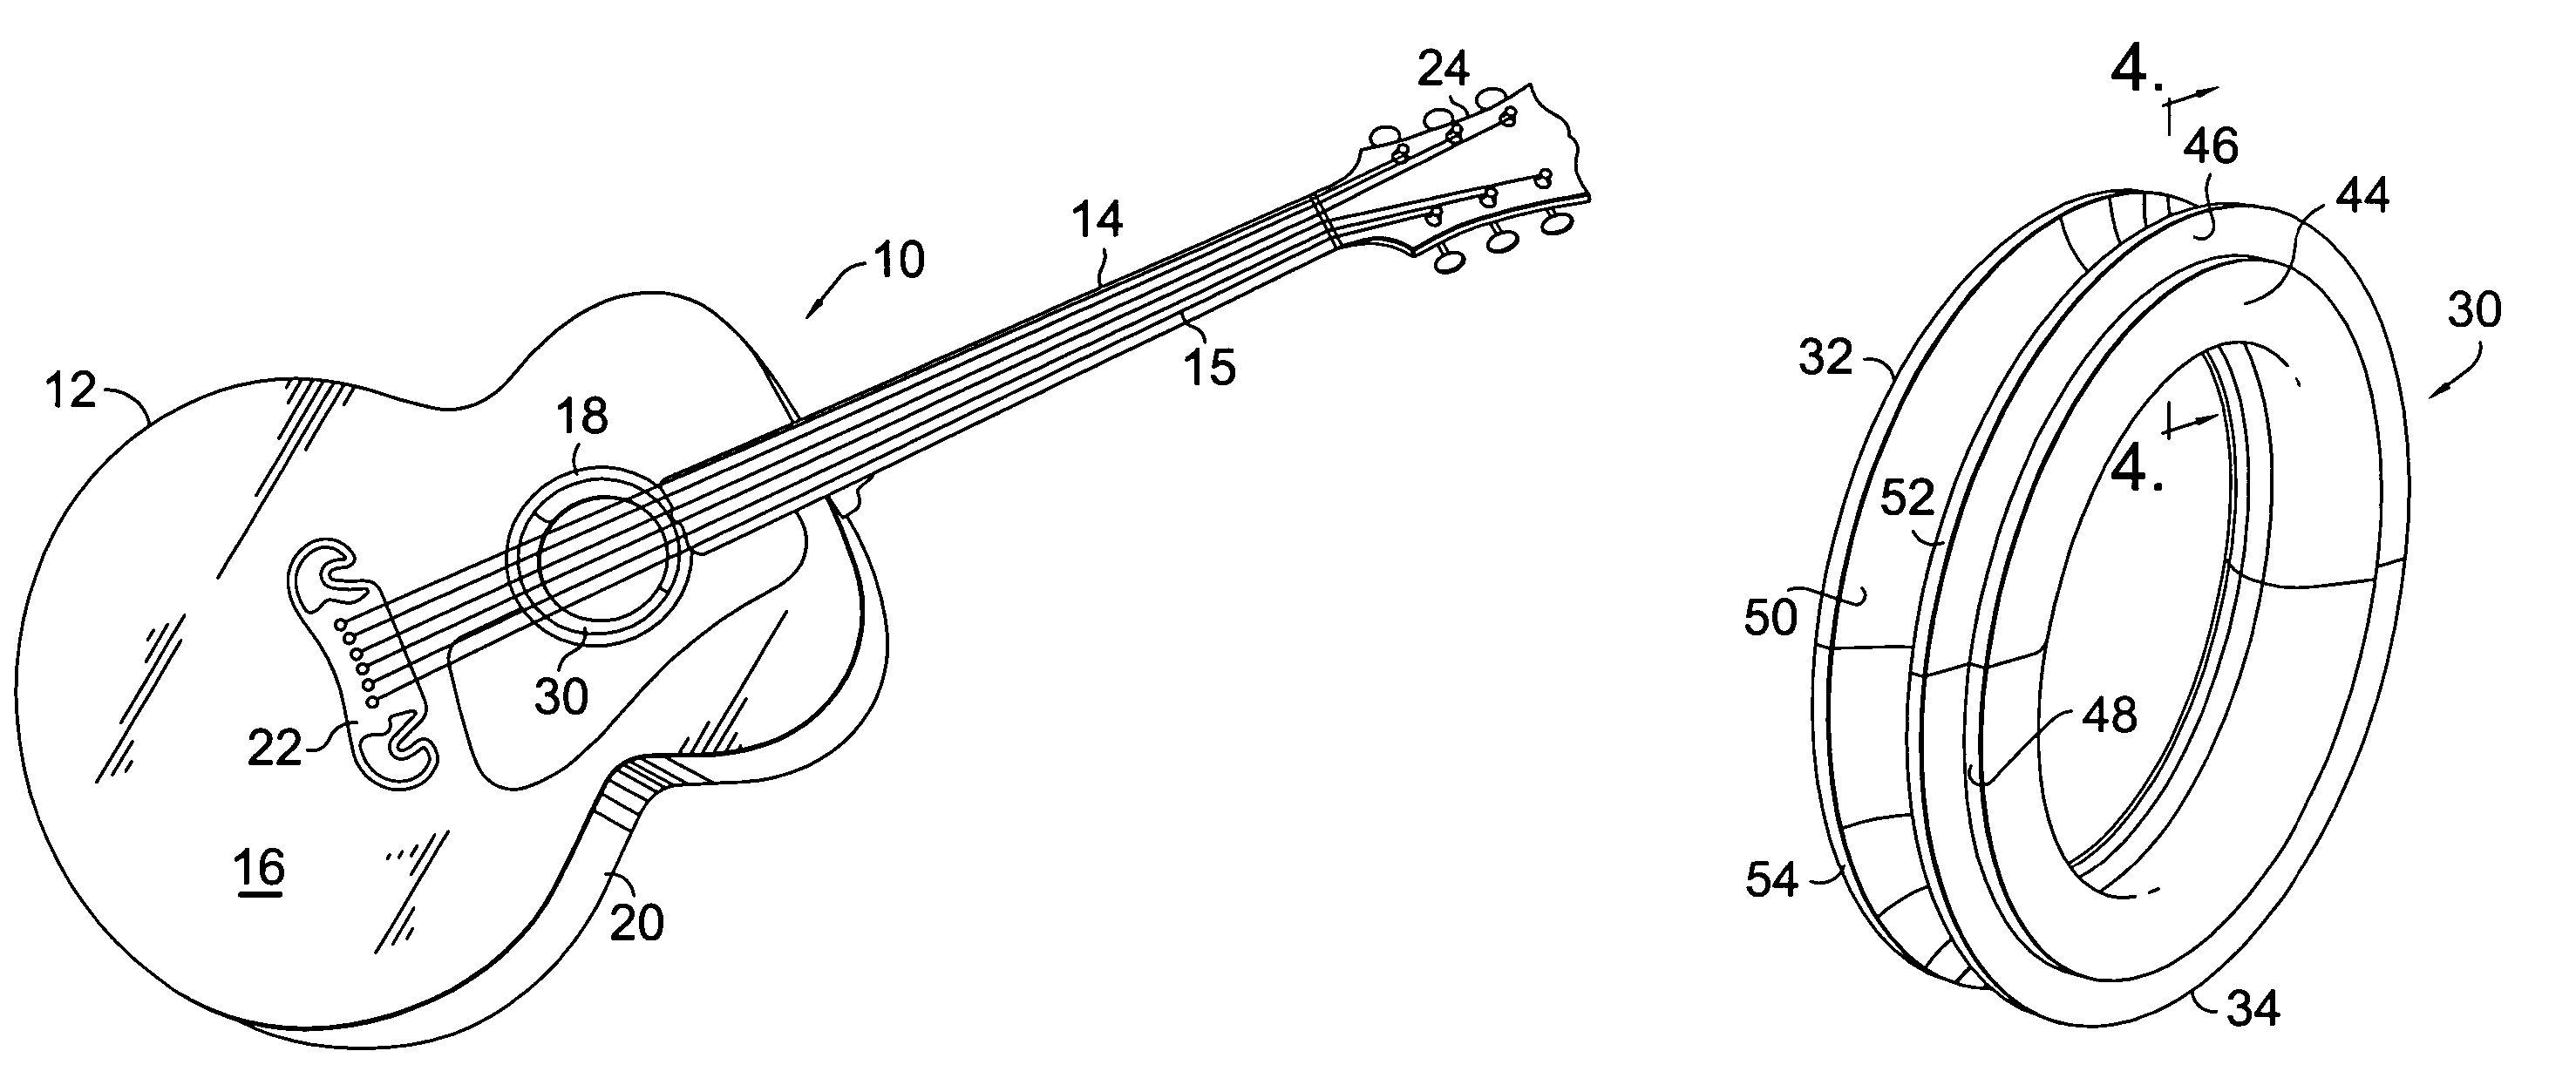 Soundhole insert for a stringed instrument